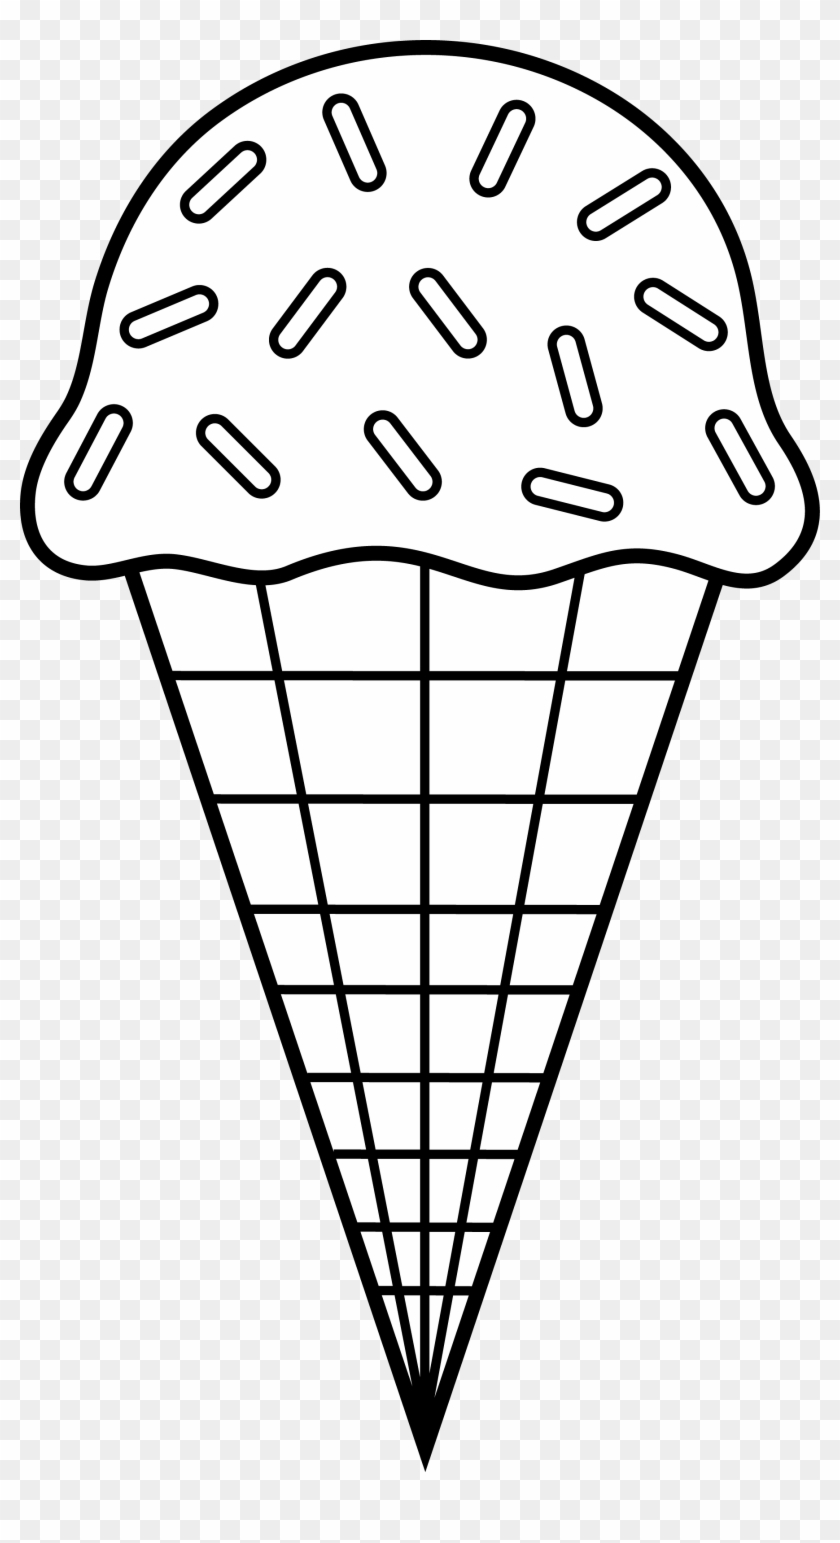 Ice Cream Clip Art Black And White Ice Cream Coloring Pages Free Transparent Png Clipart Images Download